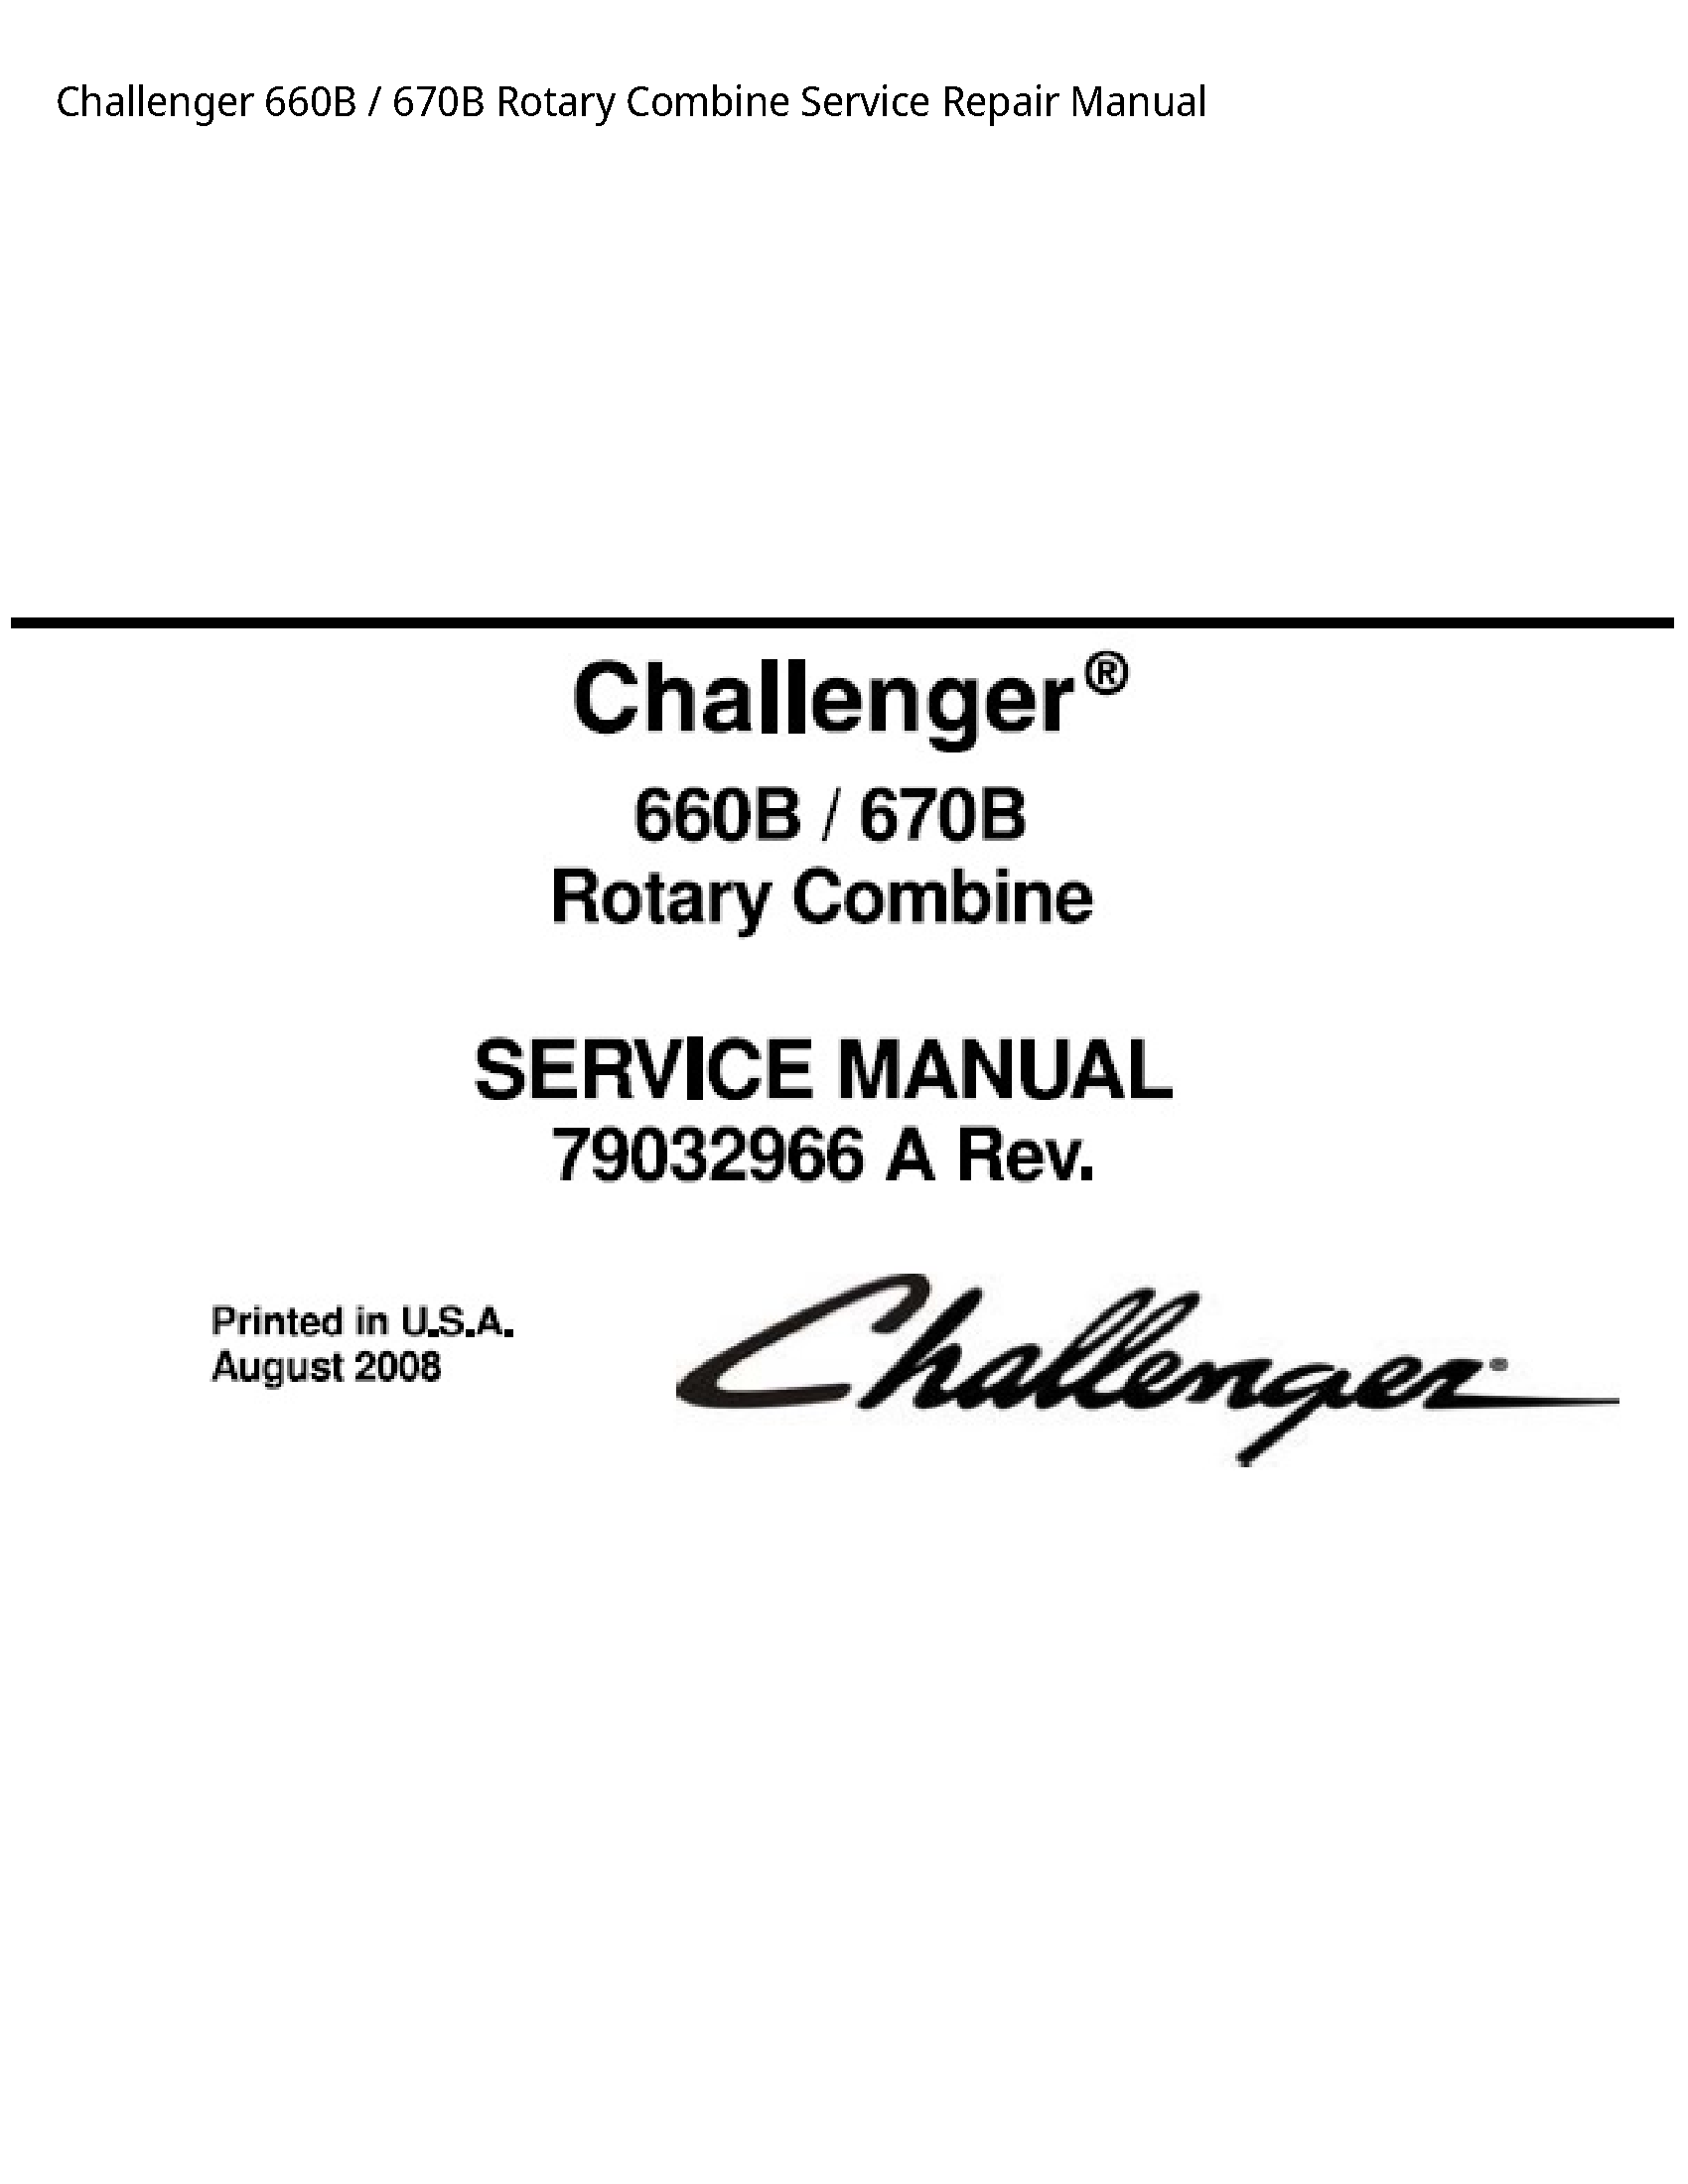 Challenger 660B Rotary Combine manual